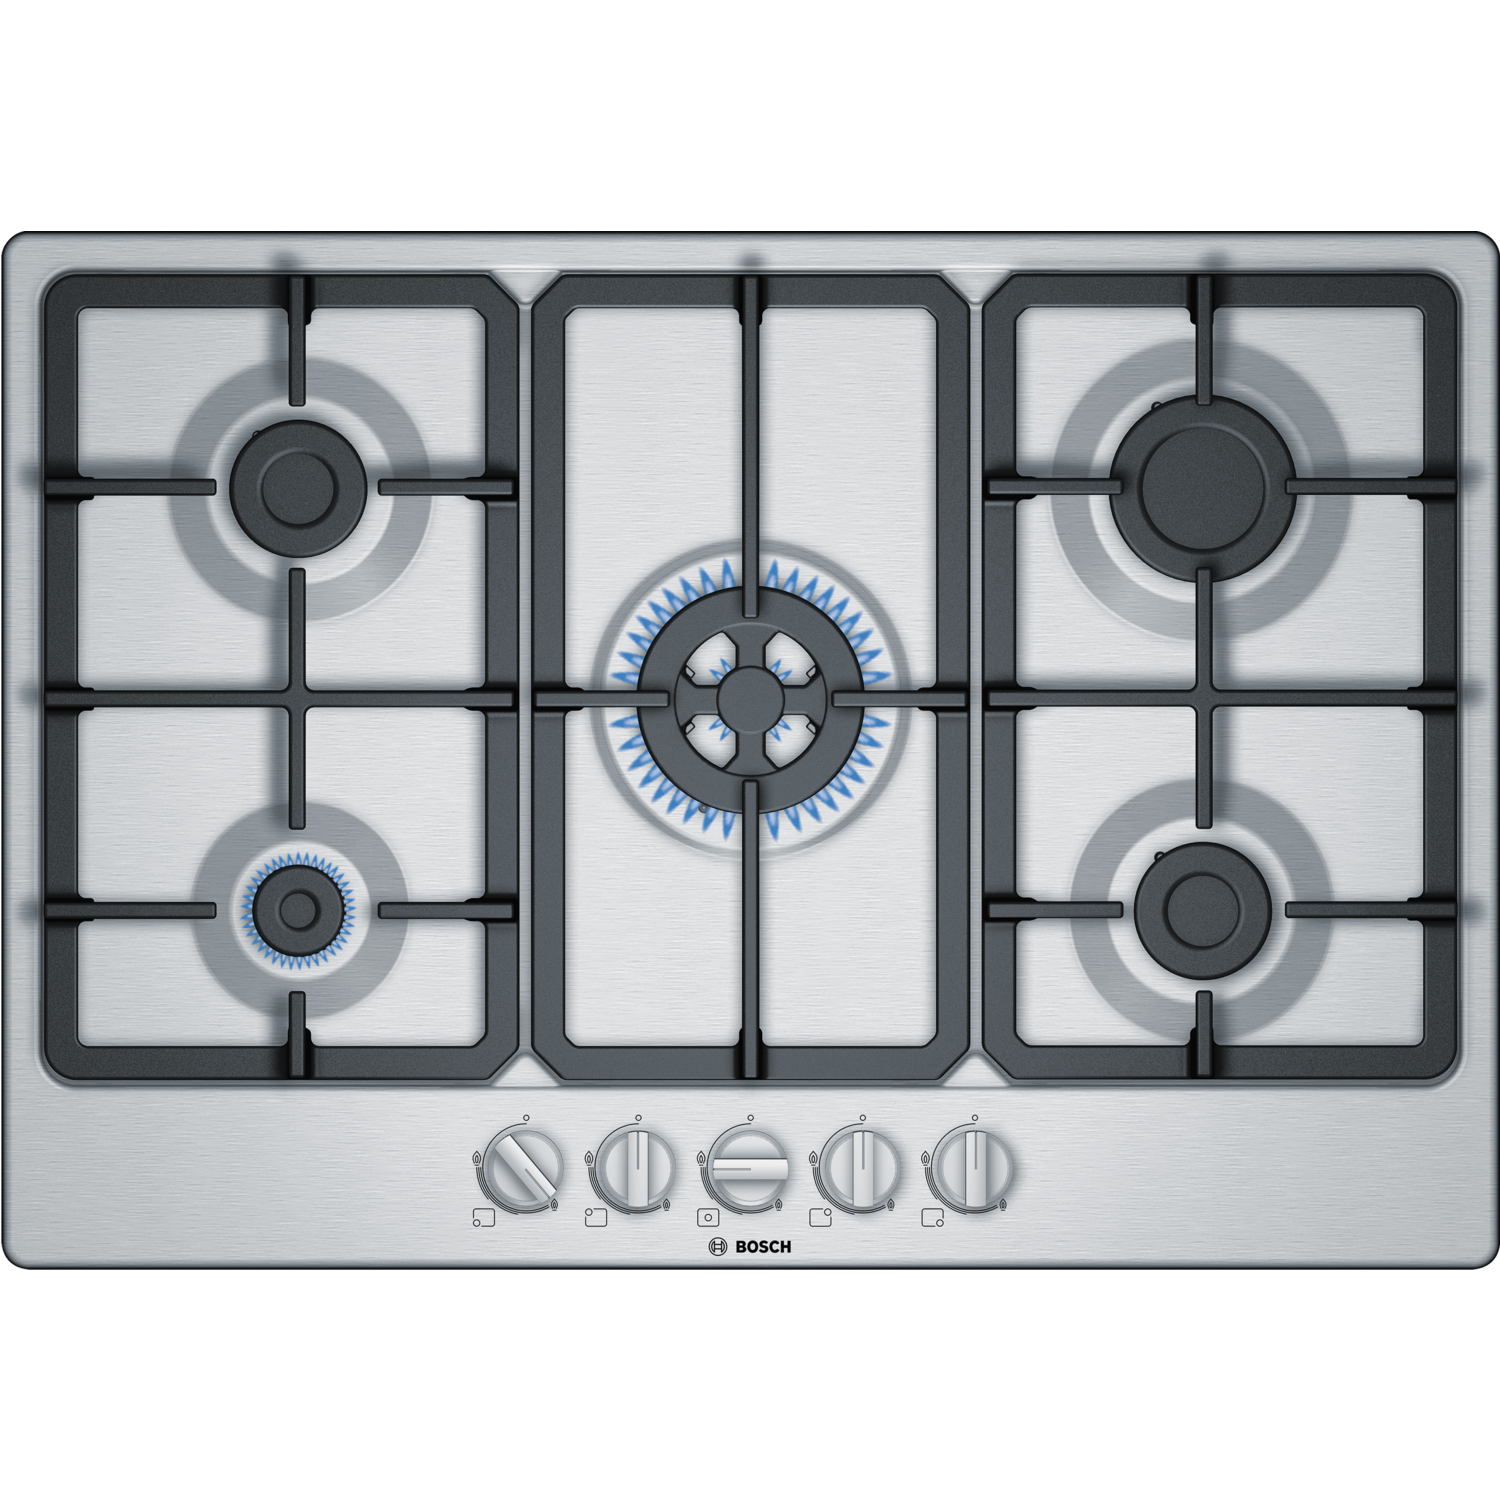 Refurbished Bosch PGQ7B5B90 75cm 5 Burner Gas Hob With Cast Iron Pan Stands Stainless Steel